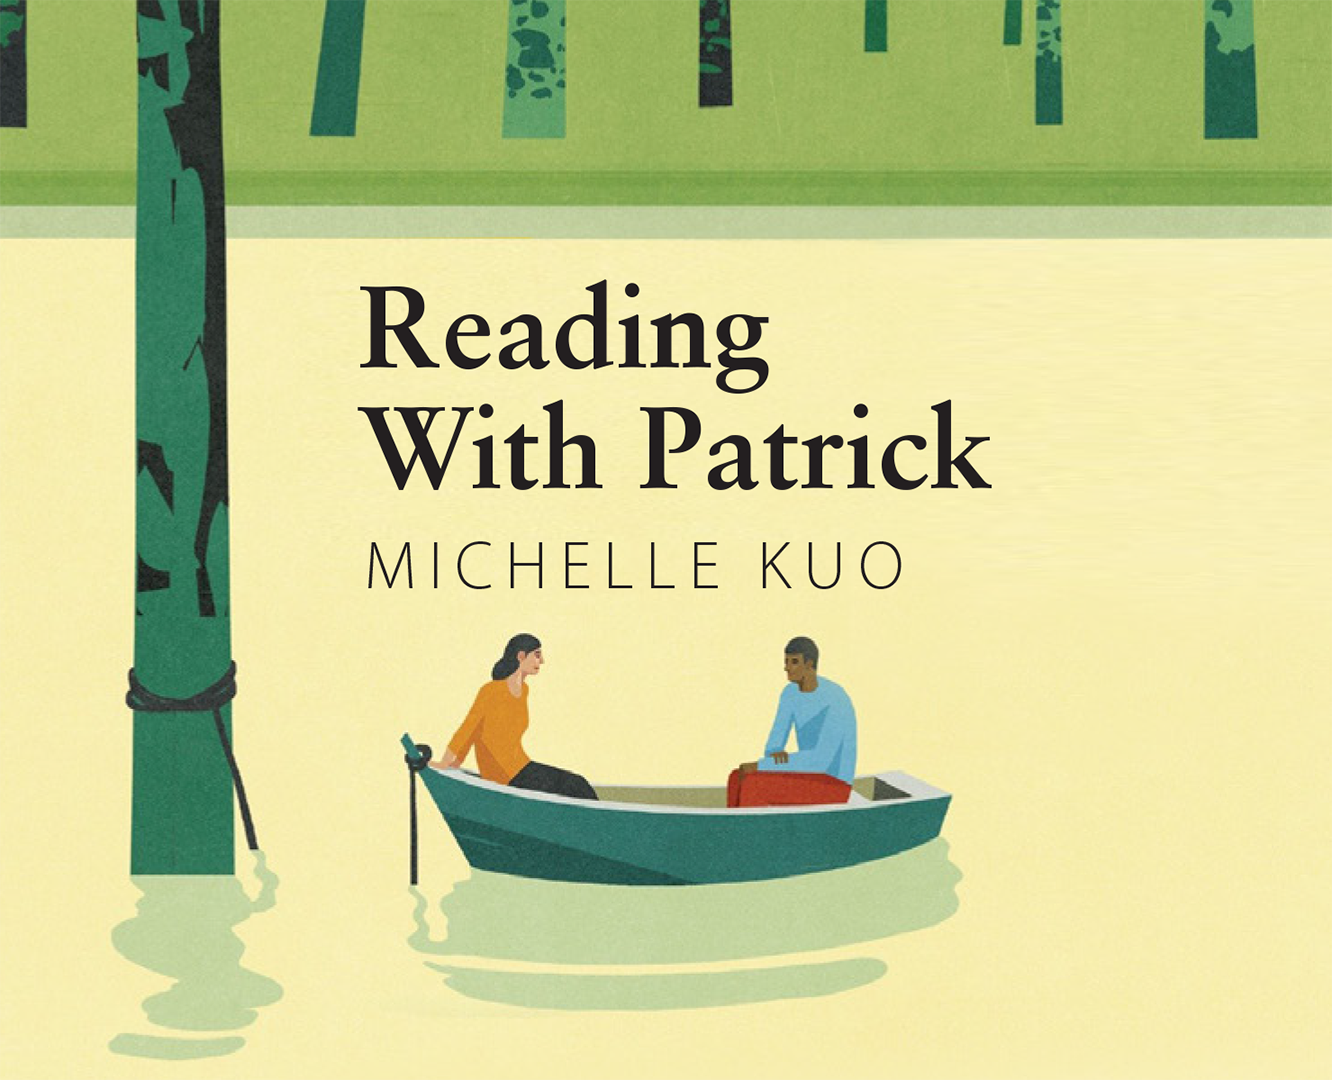 michelle kuo reading with patrick